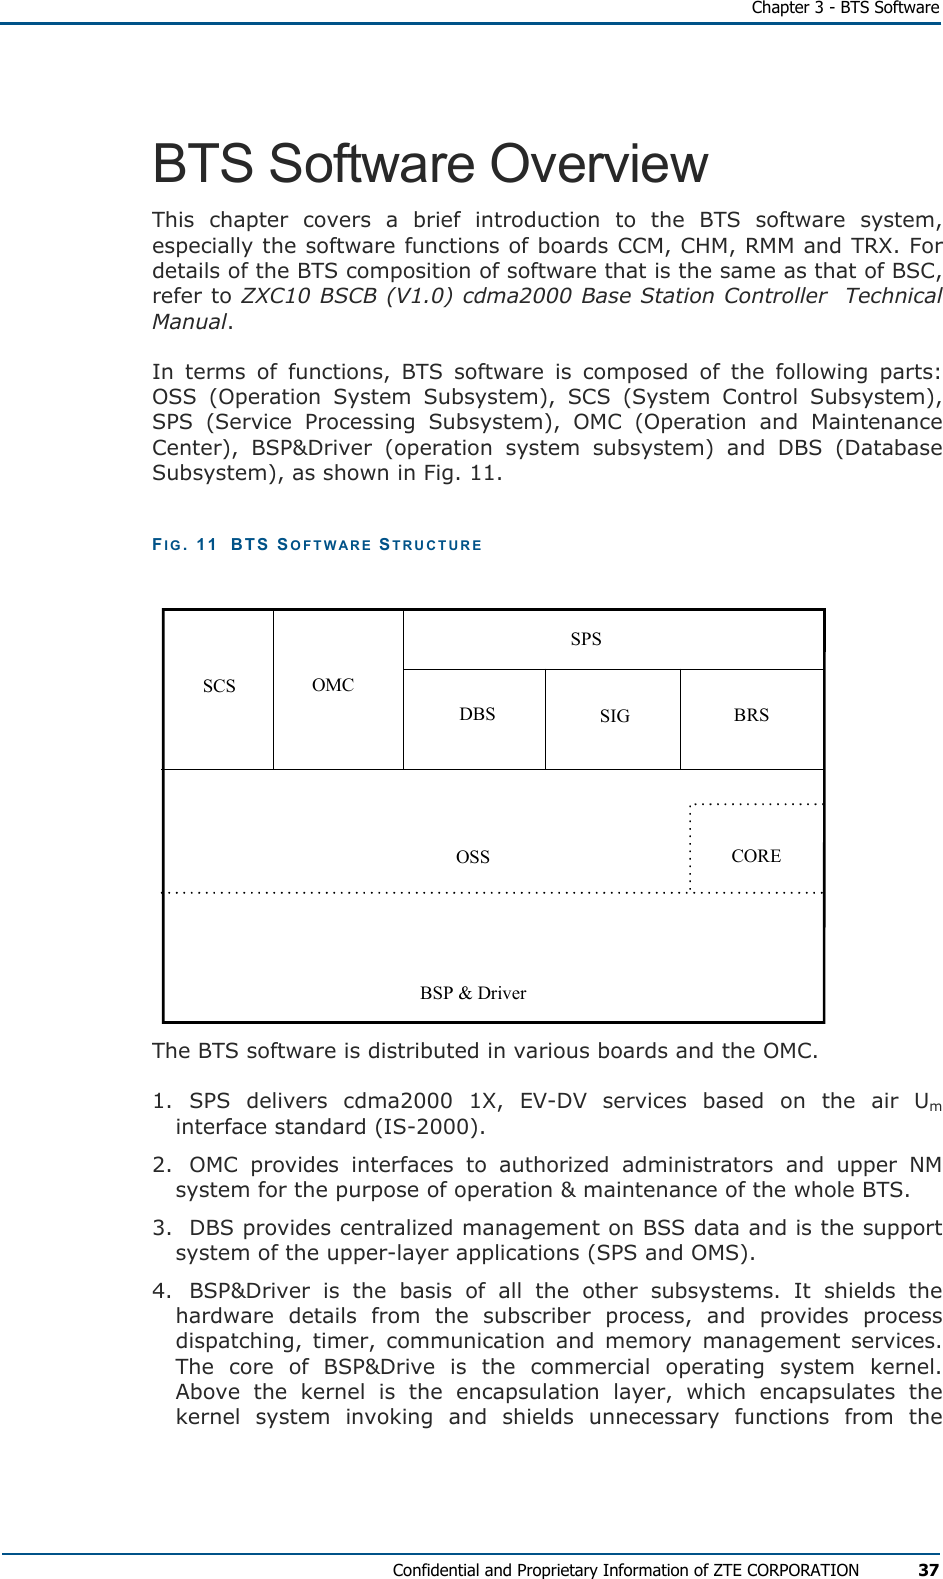   Chapter 3 - BTS Software Confidential and Proprietary Information of ZTE CORPORATION 37 BTS Software Overview This chapter covers a brief introduction to the BTS software system, especially the software functions of boards CCM, CHM, RMM and TRX. For details of the BTS composition of software that is the same as that of BSC, refer to ZXC10 BSCB (V1.0) cdma2000 Base Station Controller  Technical Manual. In terms of functions, BTS software is composed of the following parts: OSS (Operation System Subsystem), SCS (System Control Subsystem), SPS (Service Processing Subsystem), OMC (Operation and Maintenance Center), BSP&amp;Driver (operation system subsystem) and DBS (Database Subsystem), as shown in Fig. 11. FIG. 11  BTS SOFTWARE STRUCTURE  SCS OMCDBS SIG BRSSPSOSS COREBSP &amp; Driver The BTS software is distributed in various boards and the OMC.  1. SPS delivers cdma2000 1X, EV-DV services based on the air Um interface standard (IS-2000). 2.  OMC provides interfaces to authorized administrators and upper NM system for the purpose of operation &amp; maintenance of the whole BTS. 3.  DBS provides centralized management on BSS data and is the support system of the upper-layer applications (SPS and OMS). 4.  BSP&amp;Driver is the basis of all the other subsystems. It shields the hardware details from the subscriber process, and provides process dispatching, timer, communication and memory management services. The core of BSP&amp;Drive is the commercial operating system kernel. Above the kernel is the encapsulation layer, which encapsulates the kernel system invoking and shields unnecessary functions from the 